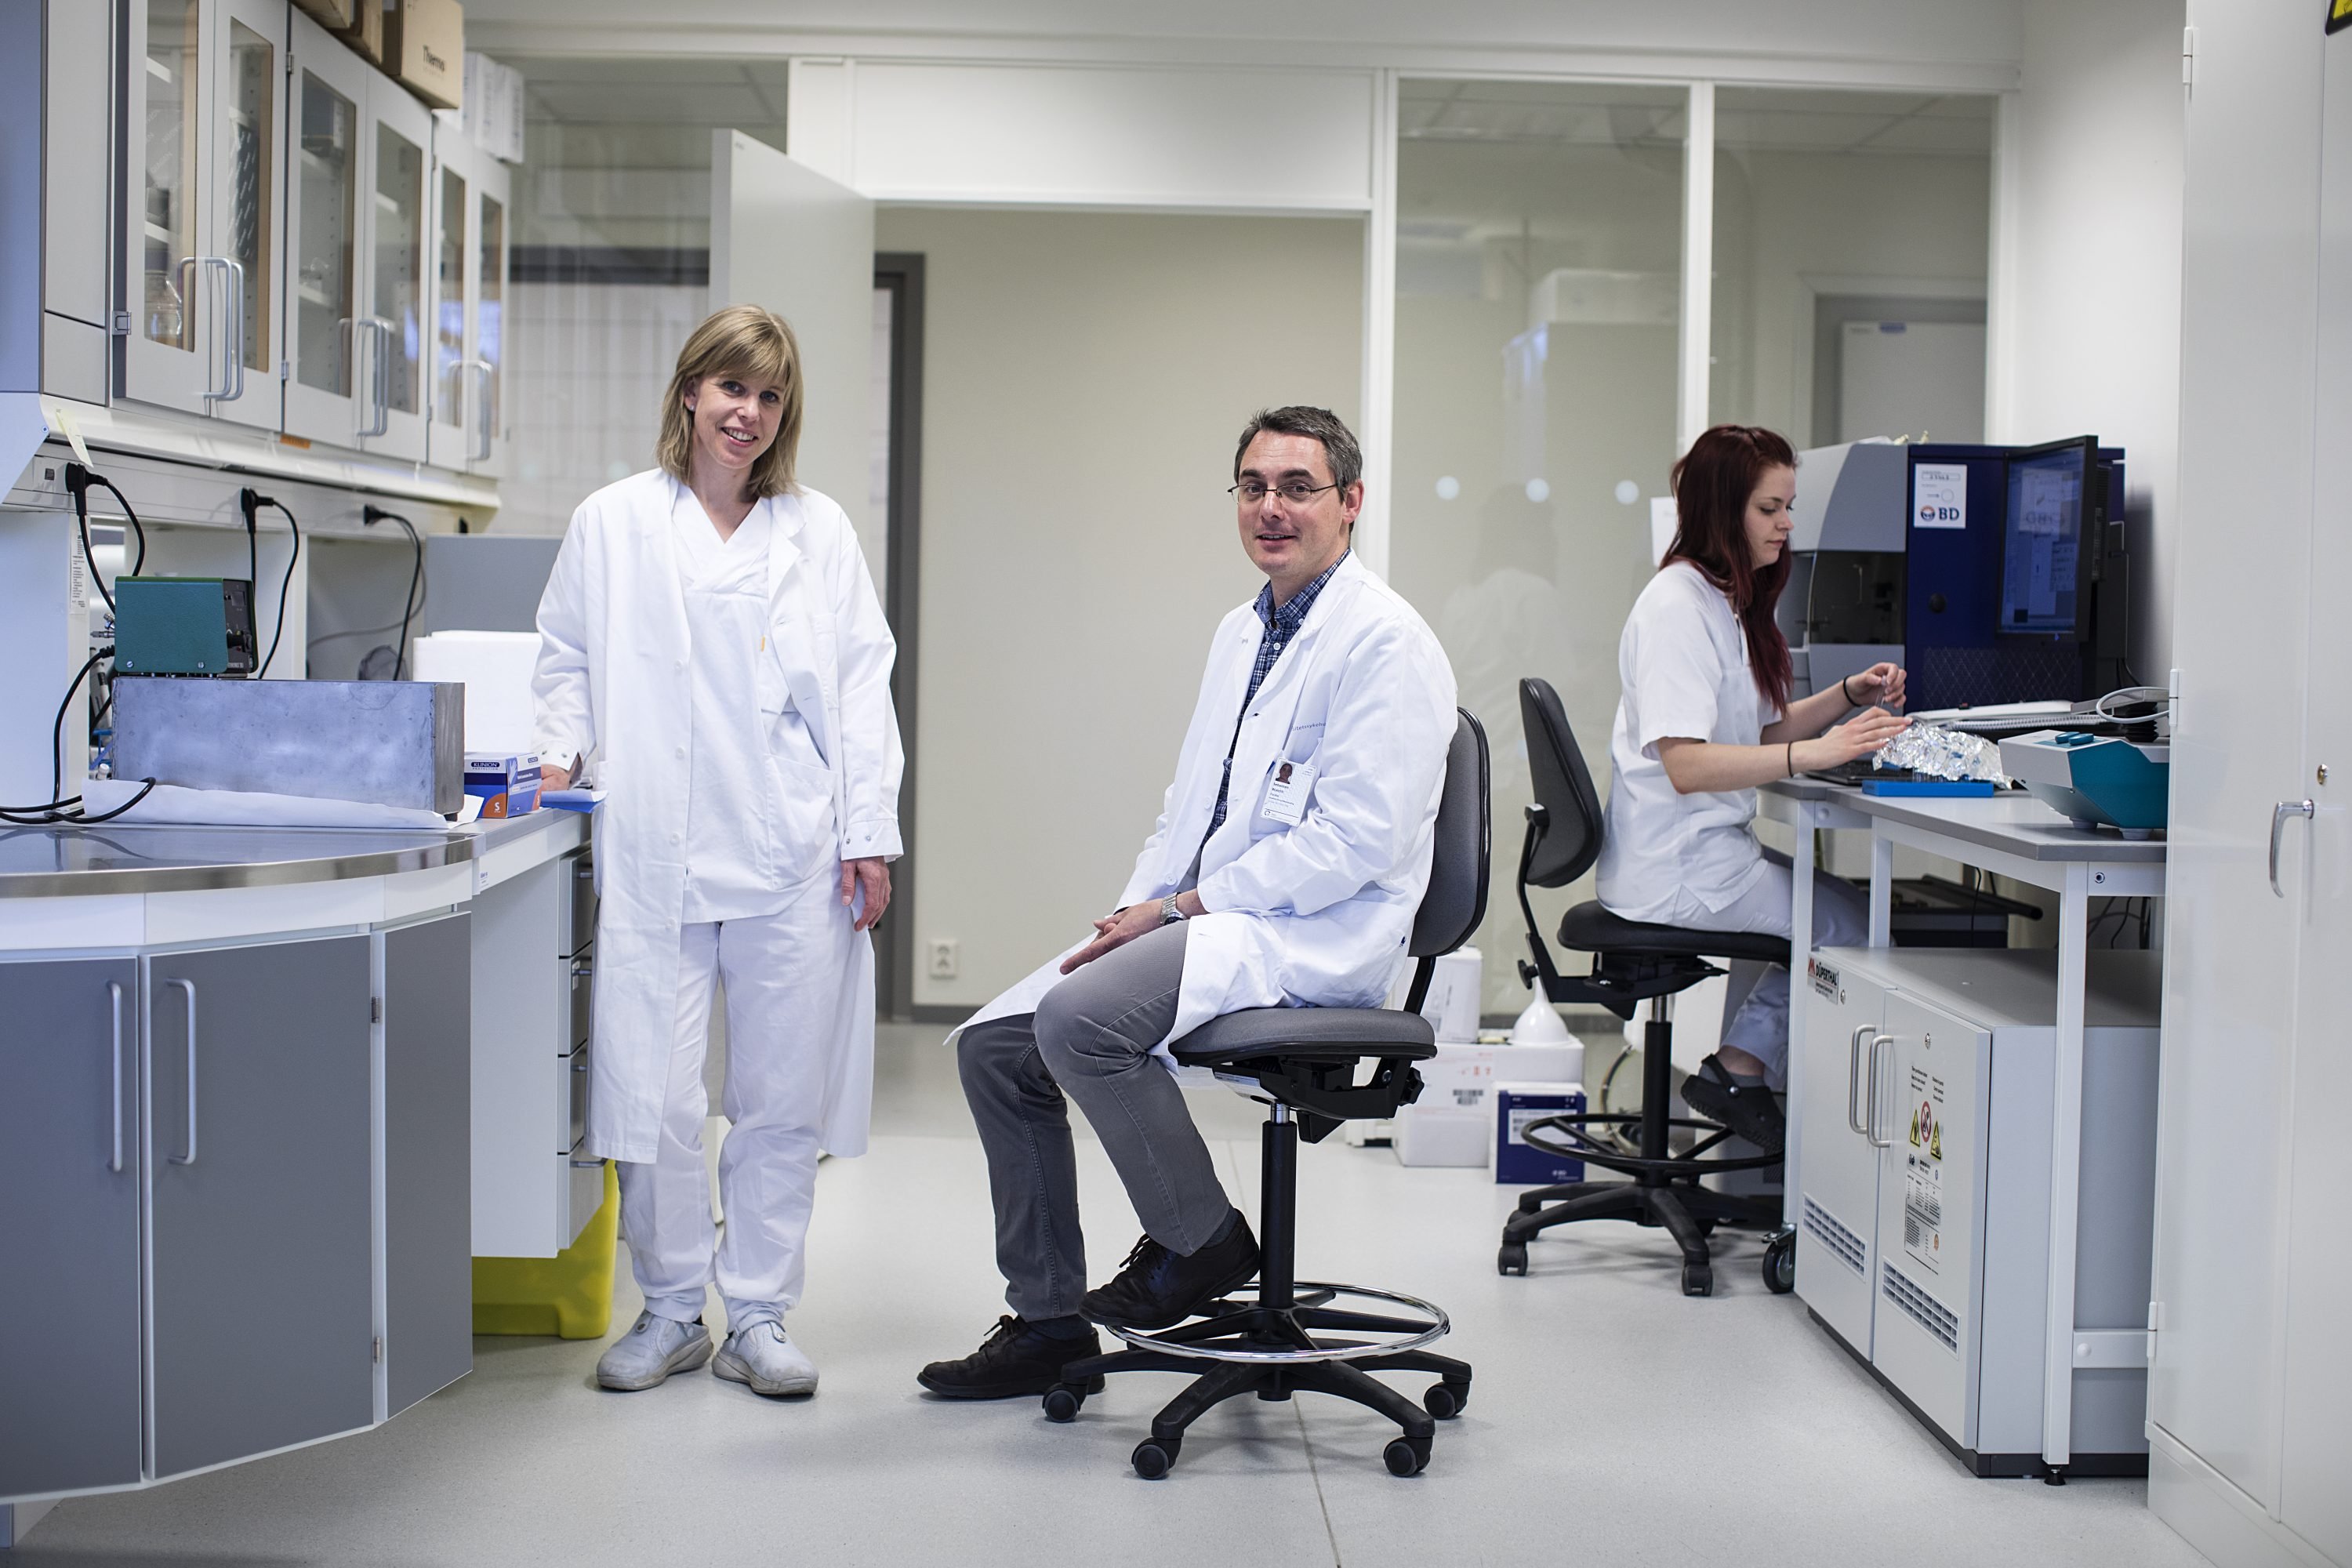 Group leaders Else Marit Inderberg and Sébastien Wälchli often work in one of the cell labs in Oslo Cancer Cluster Incubator. Photo: Christopher Olssøn